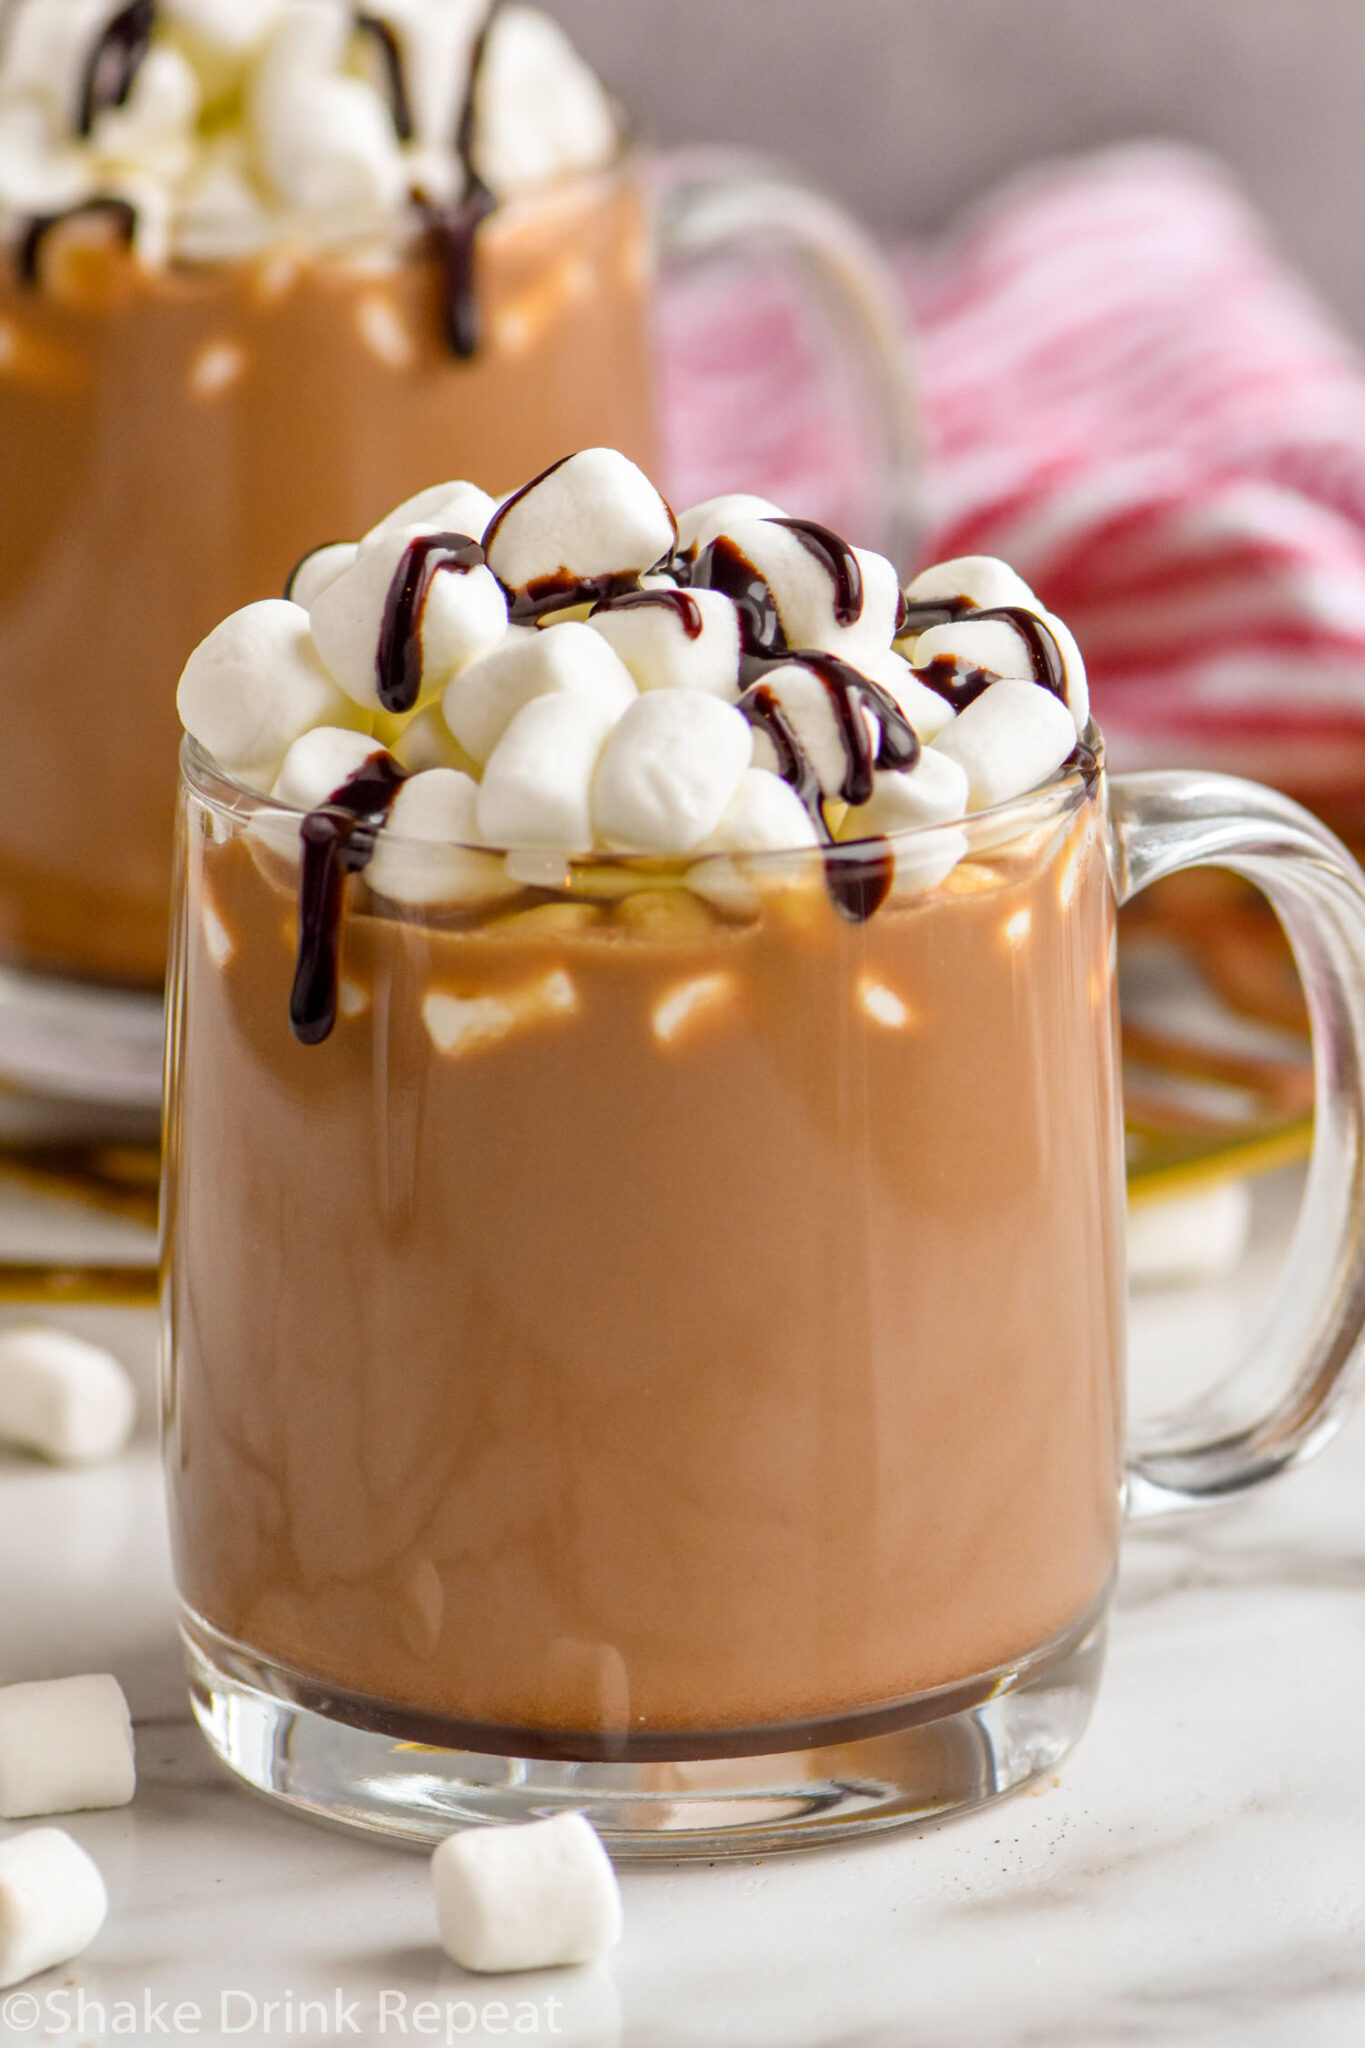 Spiked Hot Chocolate Shake Drink Repeat